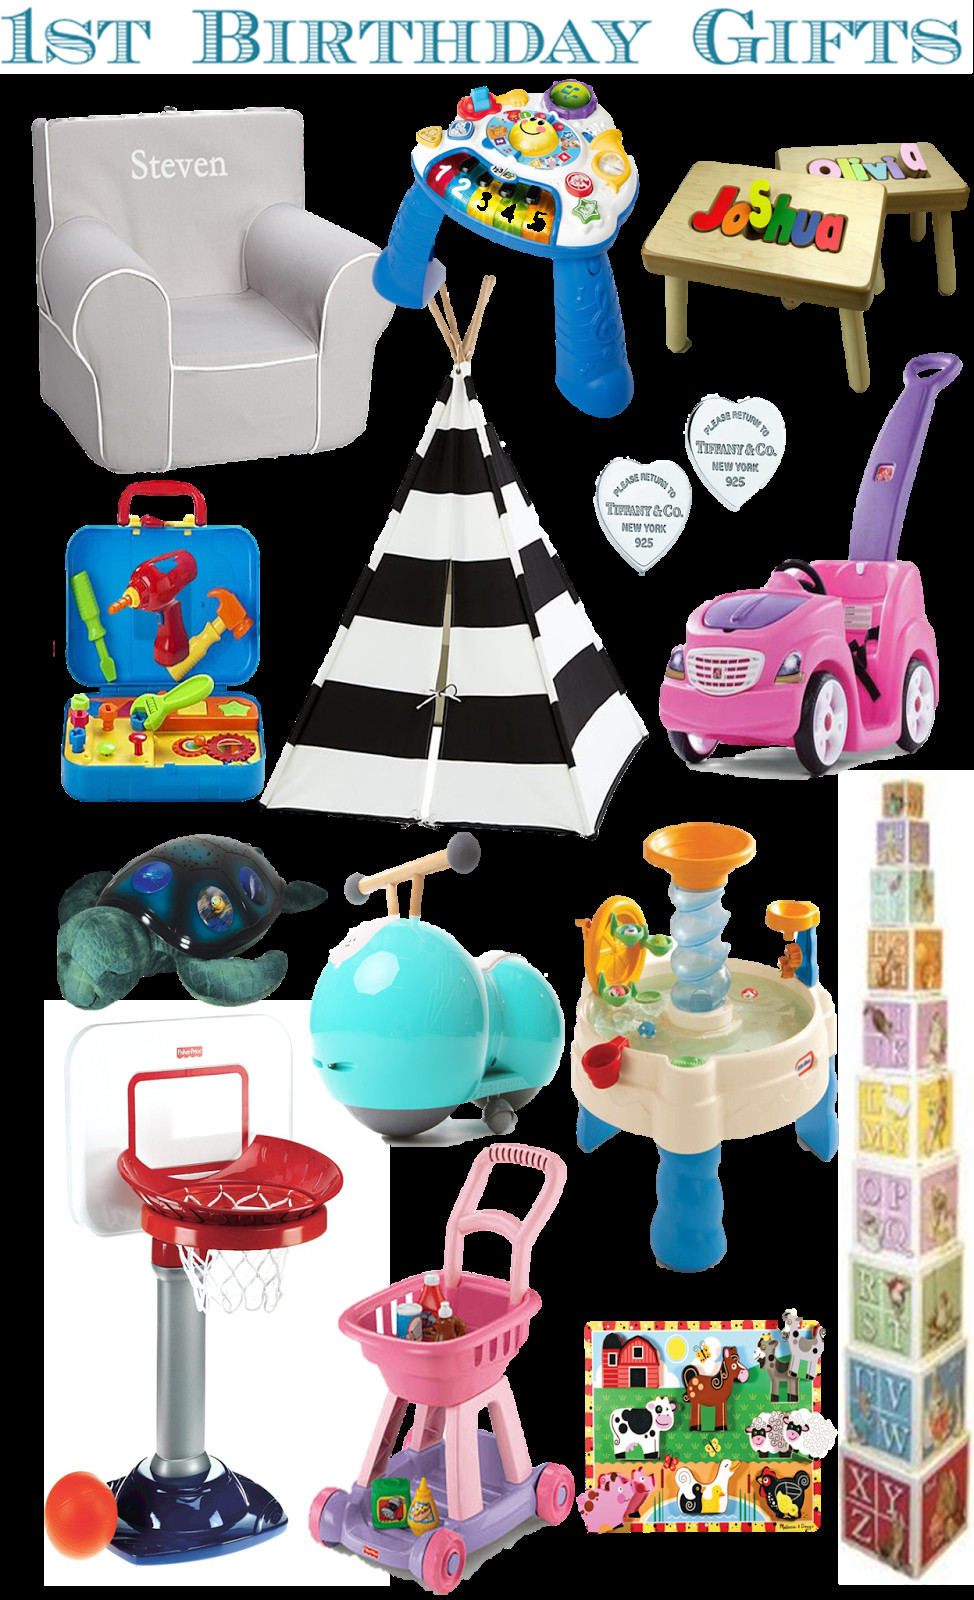 1 Year Baby Boy Gift Ideas
 rnlMusings Gift Guide 1st Birthday Gifts